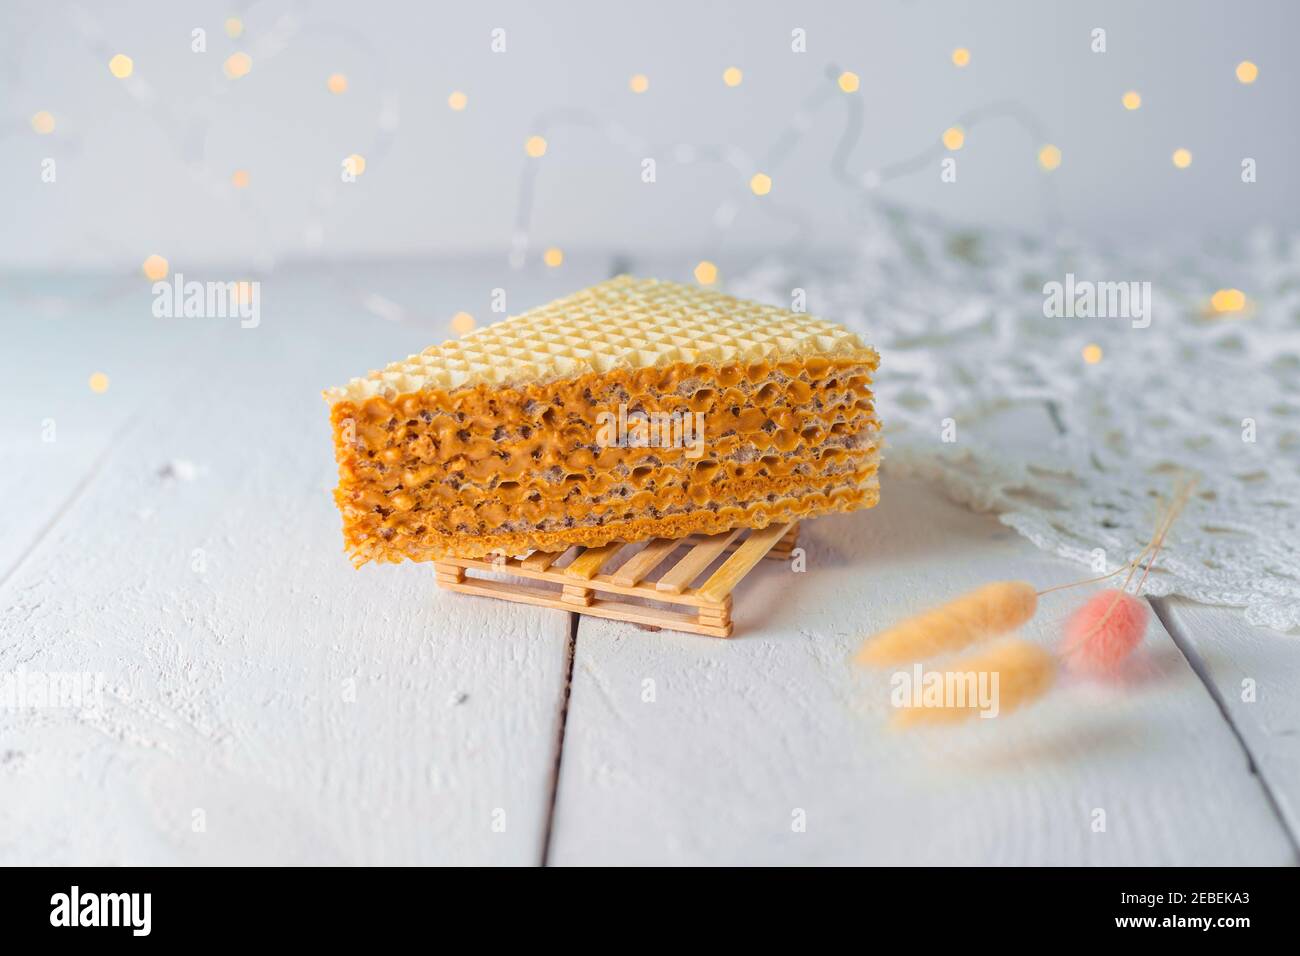 An appetizing piece of waffle cake with condensed milk. Close up view. Bakery food photography. Stock Photo